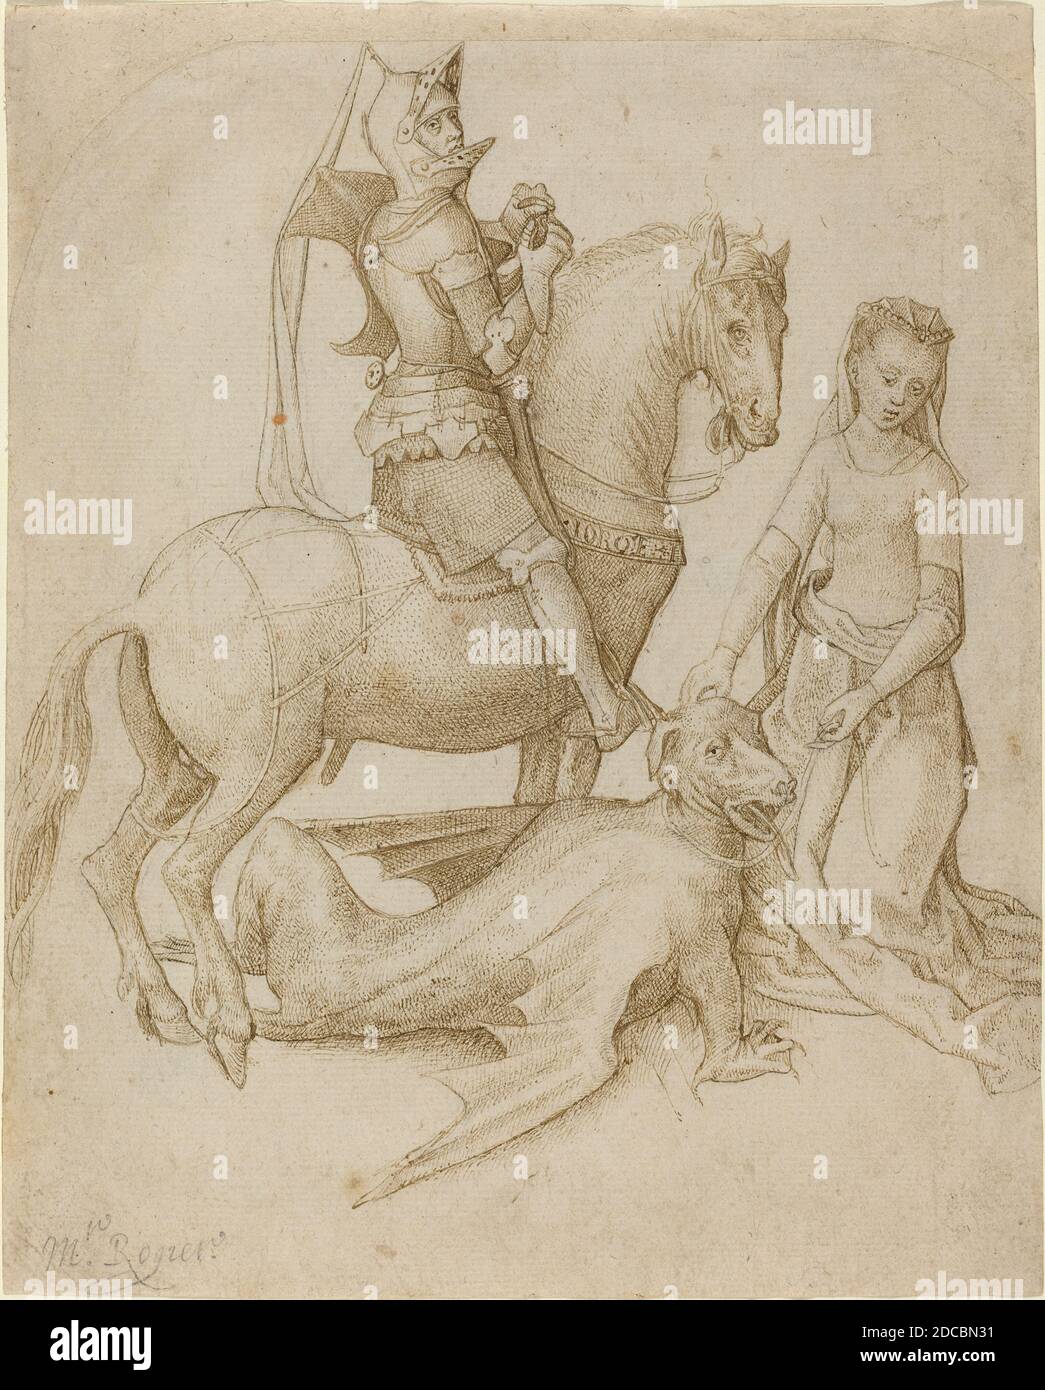 Hugo van der Goes, (artist), Netherlandish, c. 1440 - 1482, Saint George and the Dragon, pen and brown ink on laid paper, Overall (approximate): 20 x 16.6 cm (7 7/8 x 6 9/16 in.), support: 20.6 x 16.6 cm (8 1/8 x 6 9/16 in Stock Photo